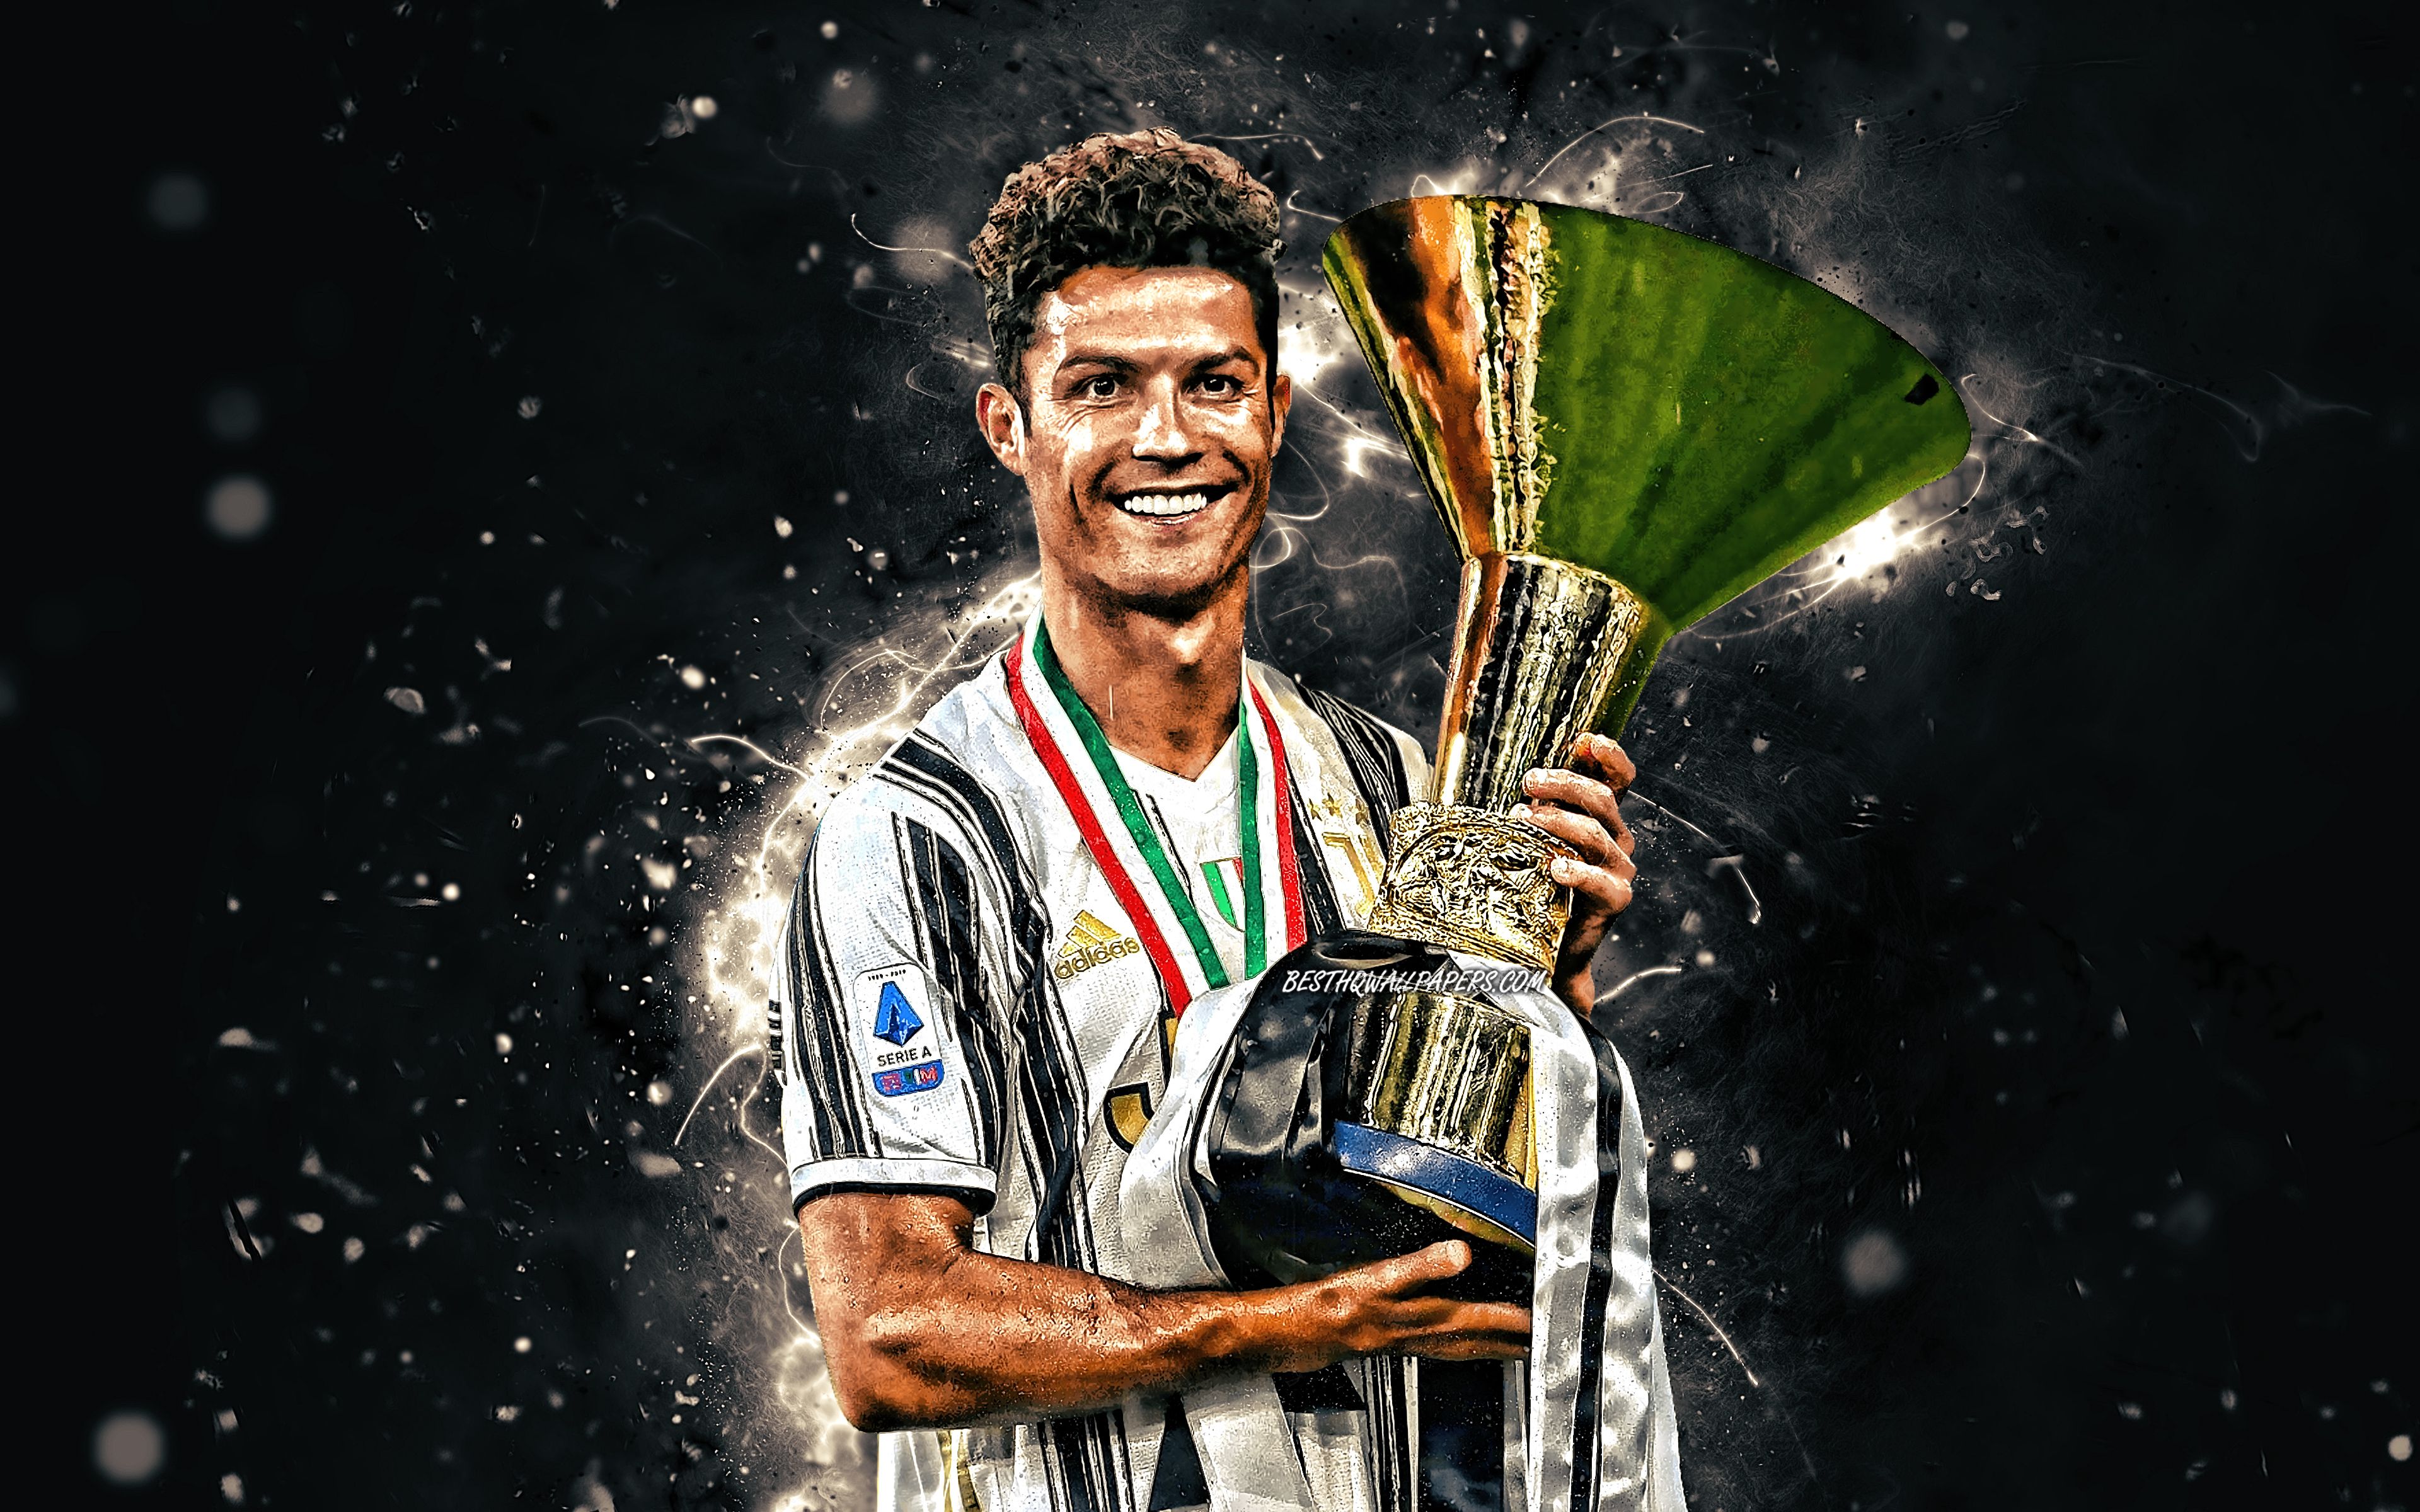 Download wallpaper Cristiano Ronaldo with cup, 4k, Juventus 2020 uniform, CR portuguese footballers, Italy, Bianconeri, Juventus FC, Cristiano Ronaldo, soccer, CR7 Juve, football stars, Serie A, Cristiano Ronaldo 4K, white neon lights